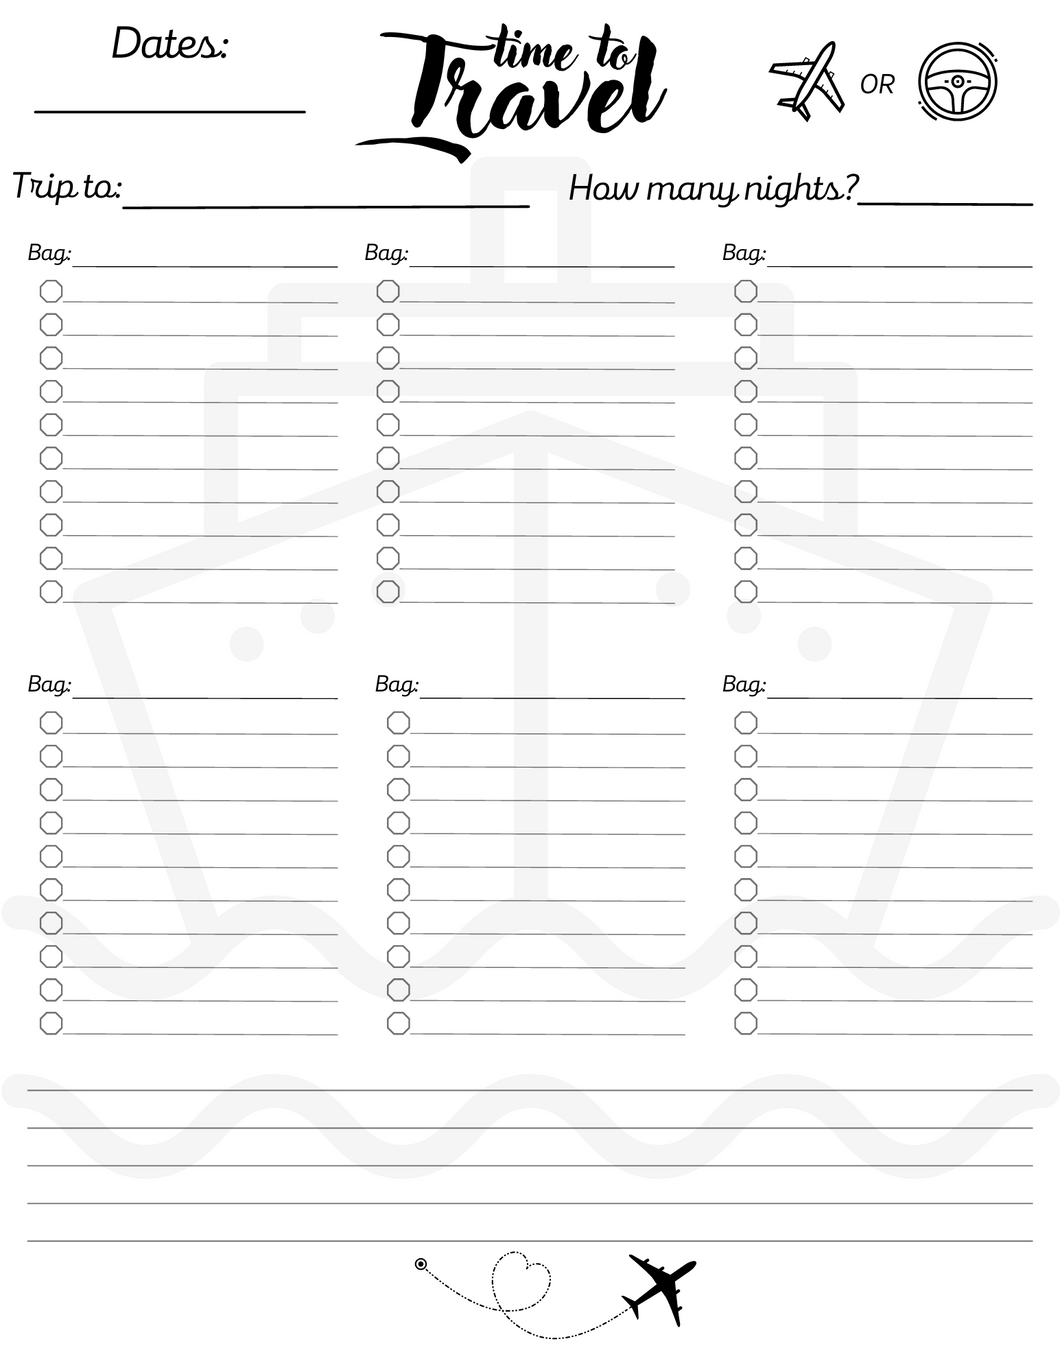 Printable Packing/Travel list with Cruise Ship & 6 bag lists - Digital download